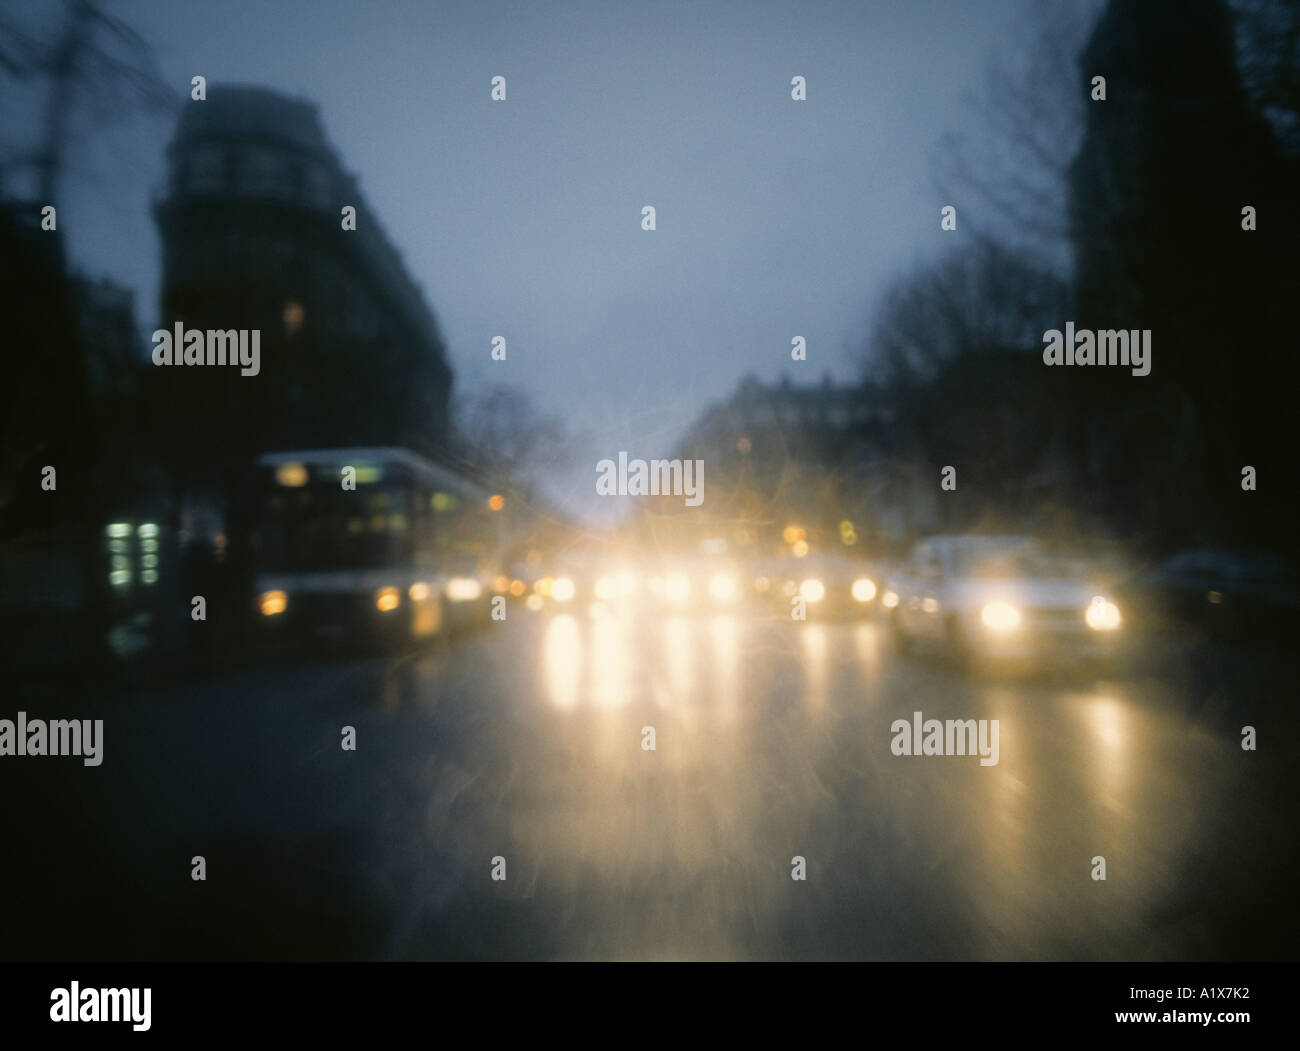 Aeternus 3, Paris, France. Selectively unfocussed image of approaching traffic. Stock Photo